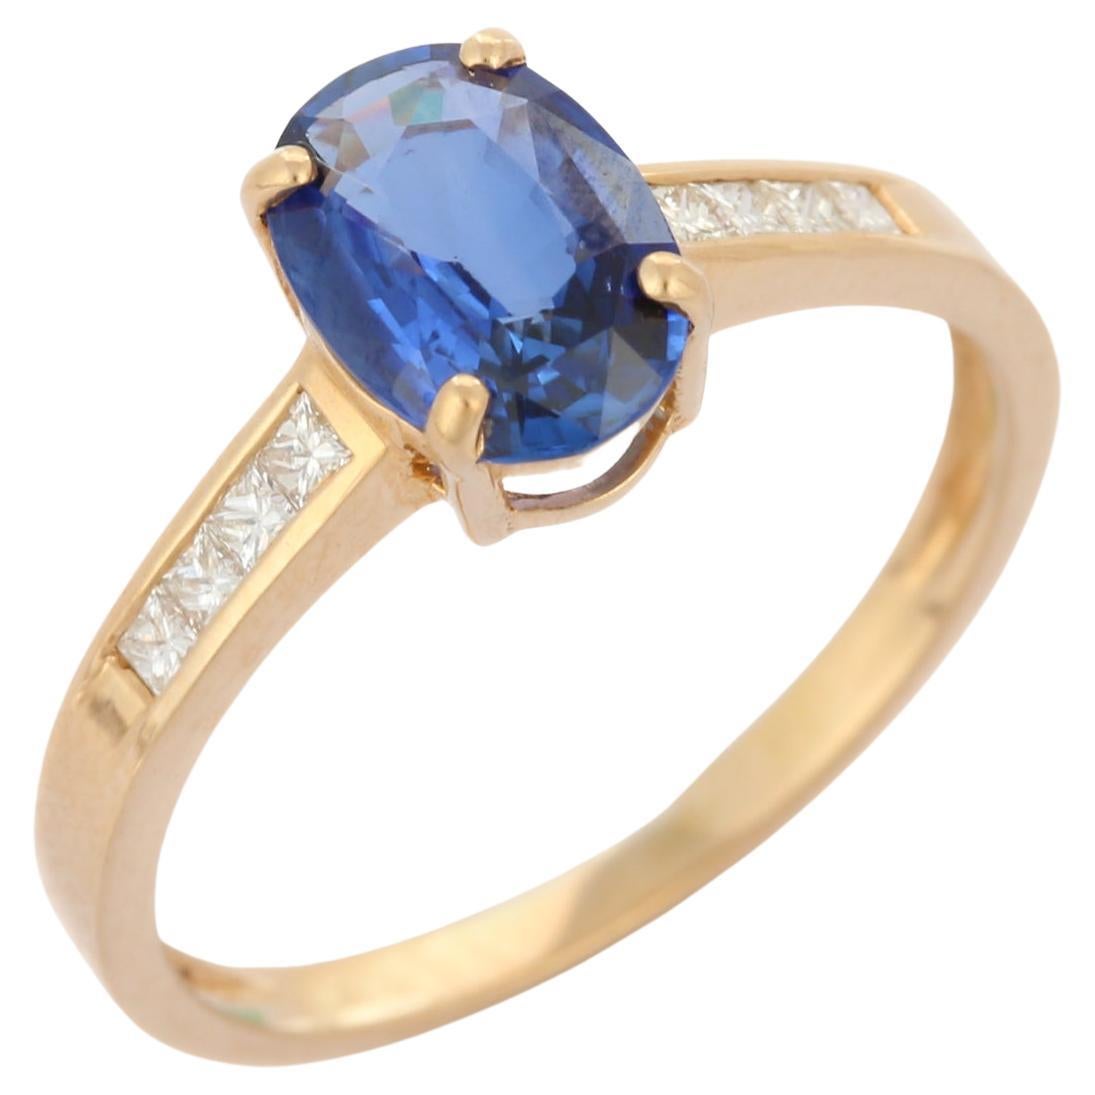 For Sale:  Solitaire Oval Blue Sapphire Diamond Engagement Ring in 14k Solid Yellow Gold